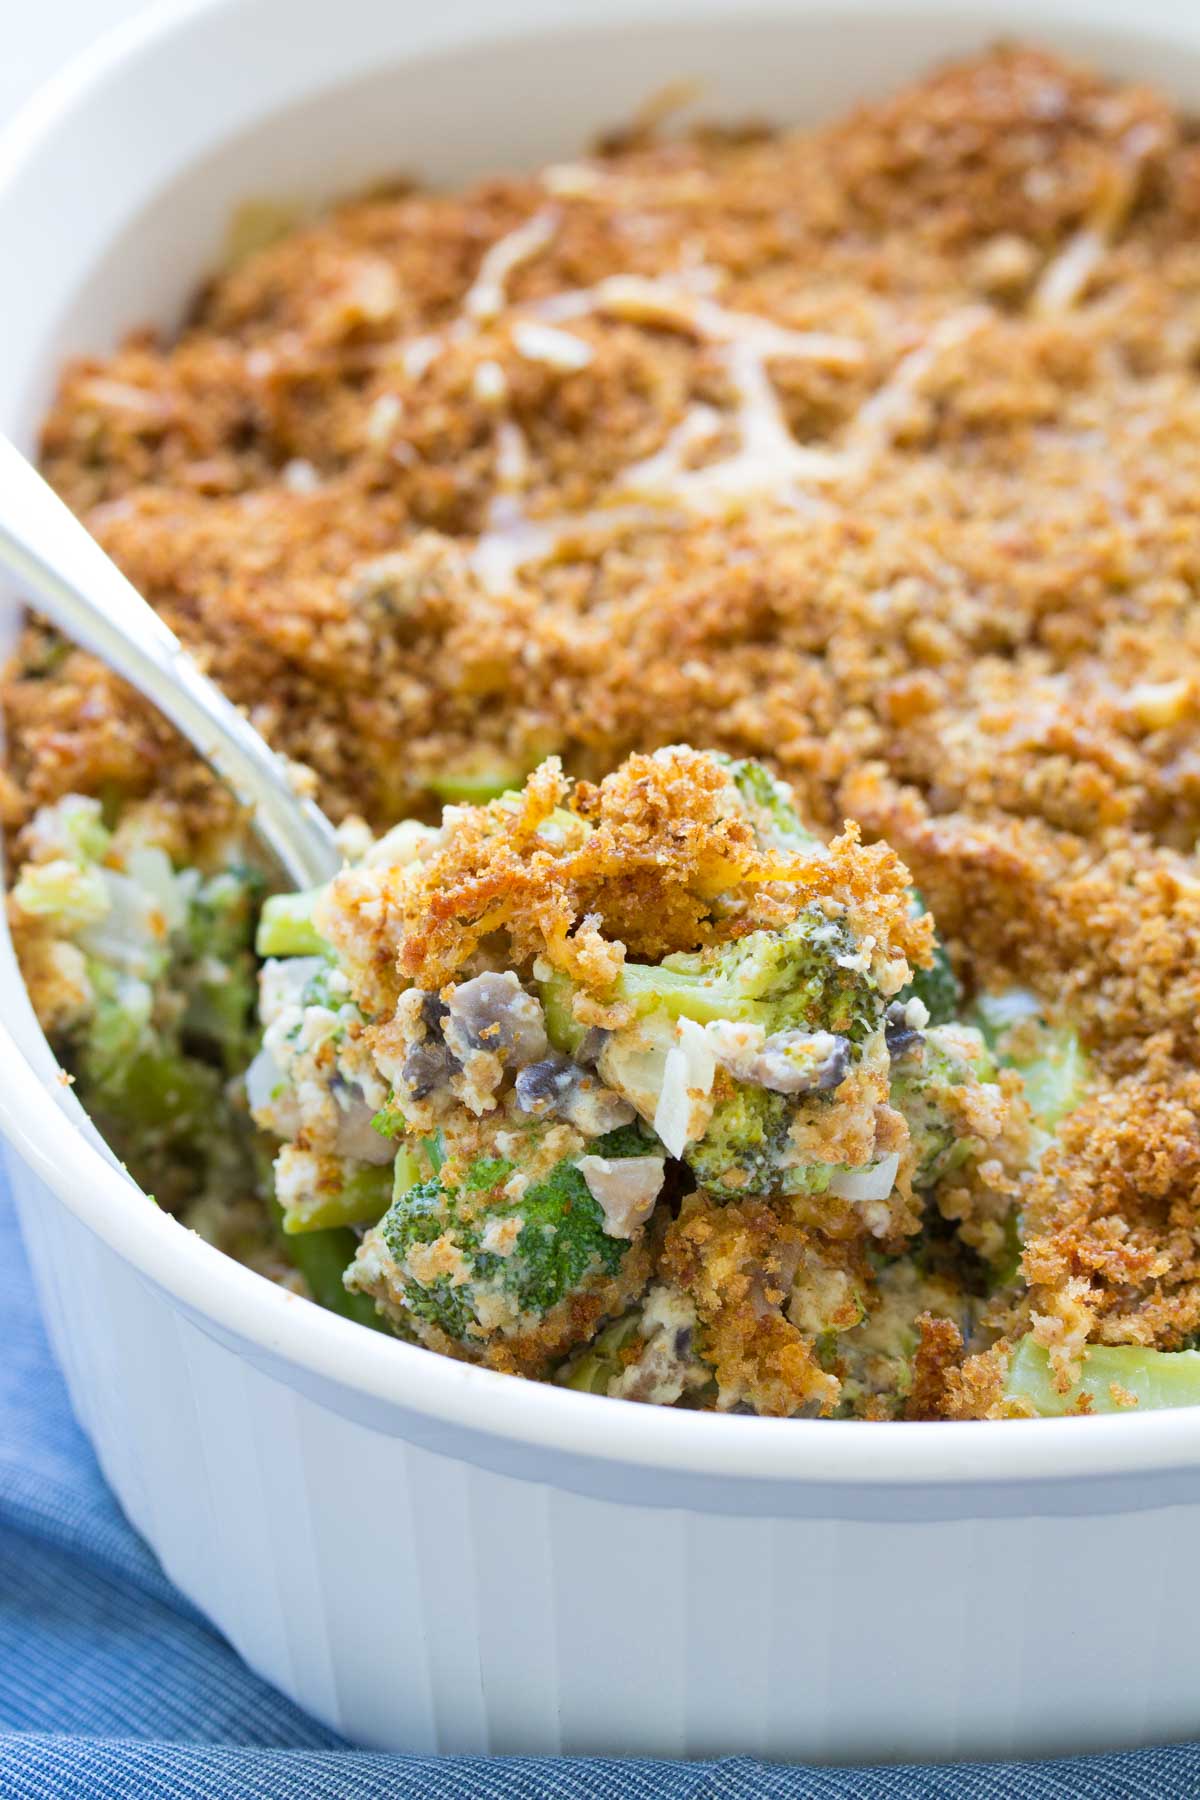 Casserole With Bread Crumb Topping